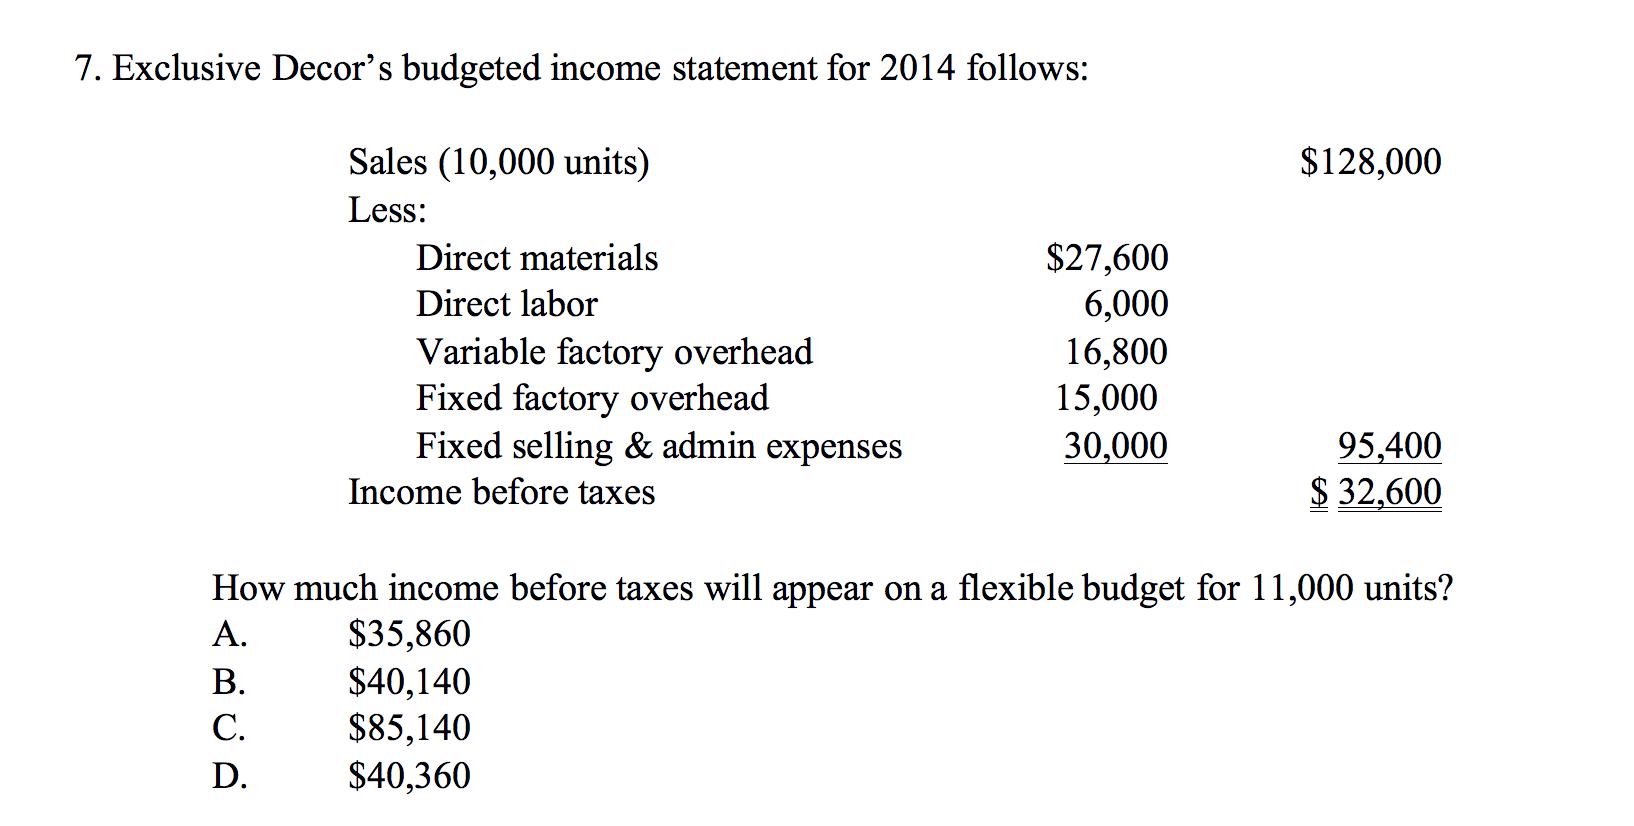 7. Exclusive Decors budgeted income statement for 2014 follows: $128,000 Sales (10,000 units) Less: Direct materials Direct